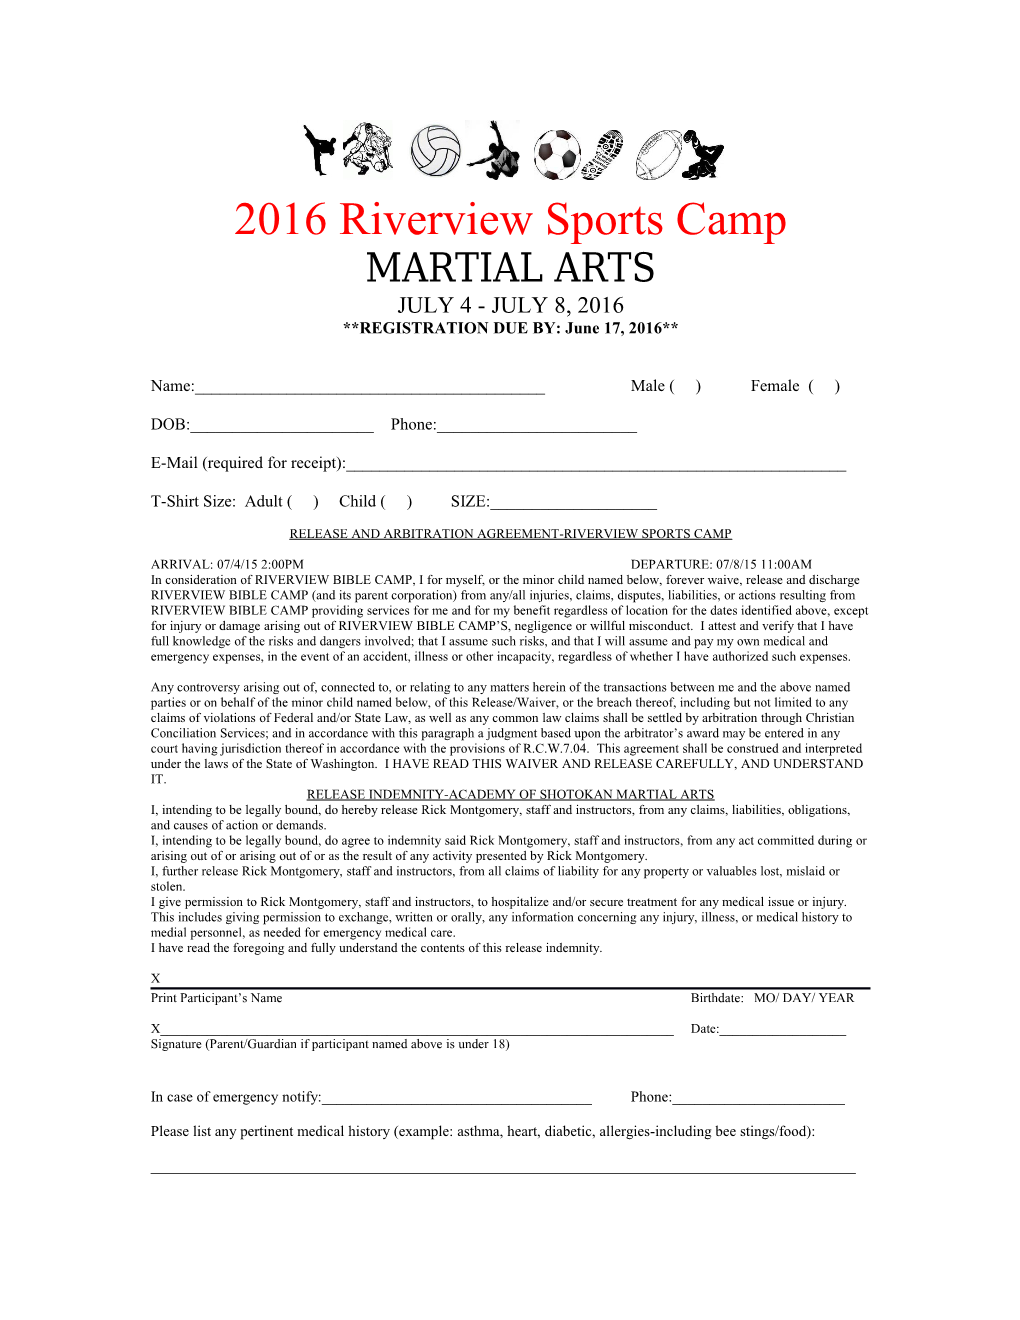 2016 Riverview Sports Camp